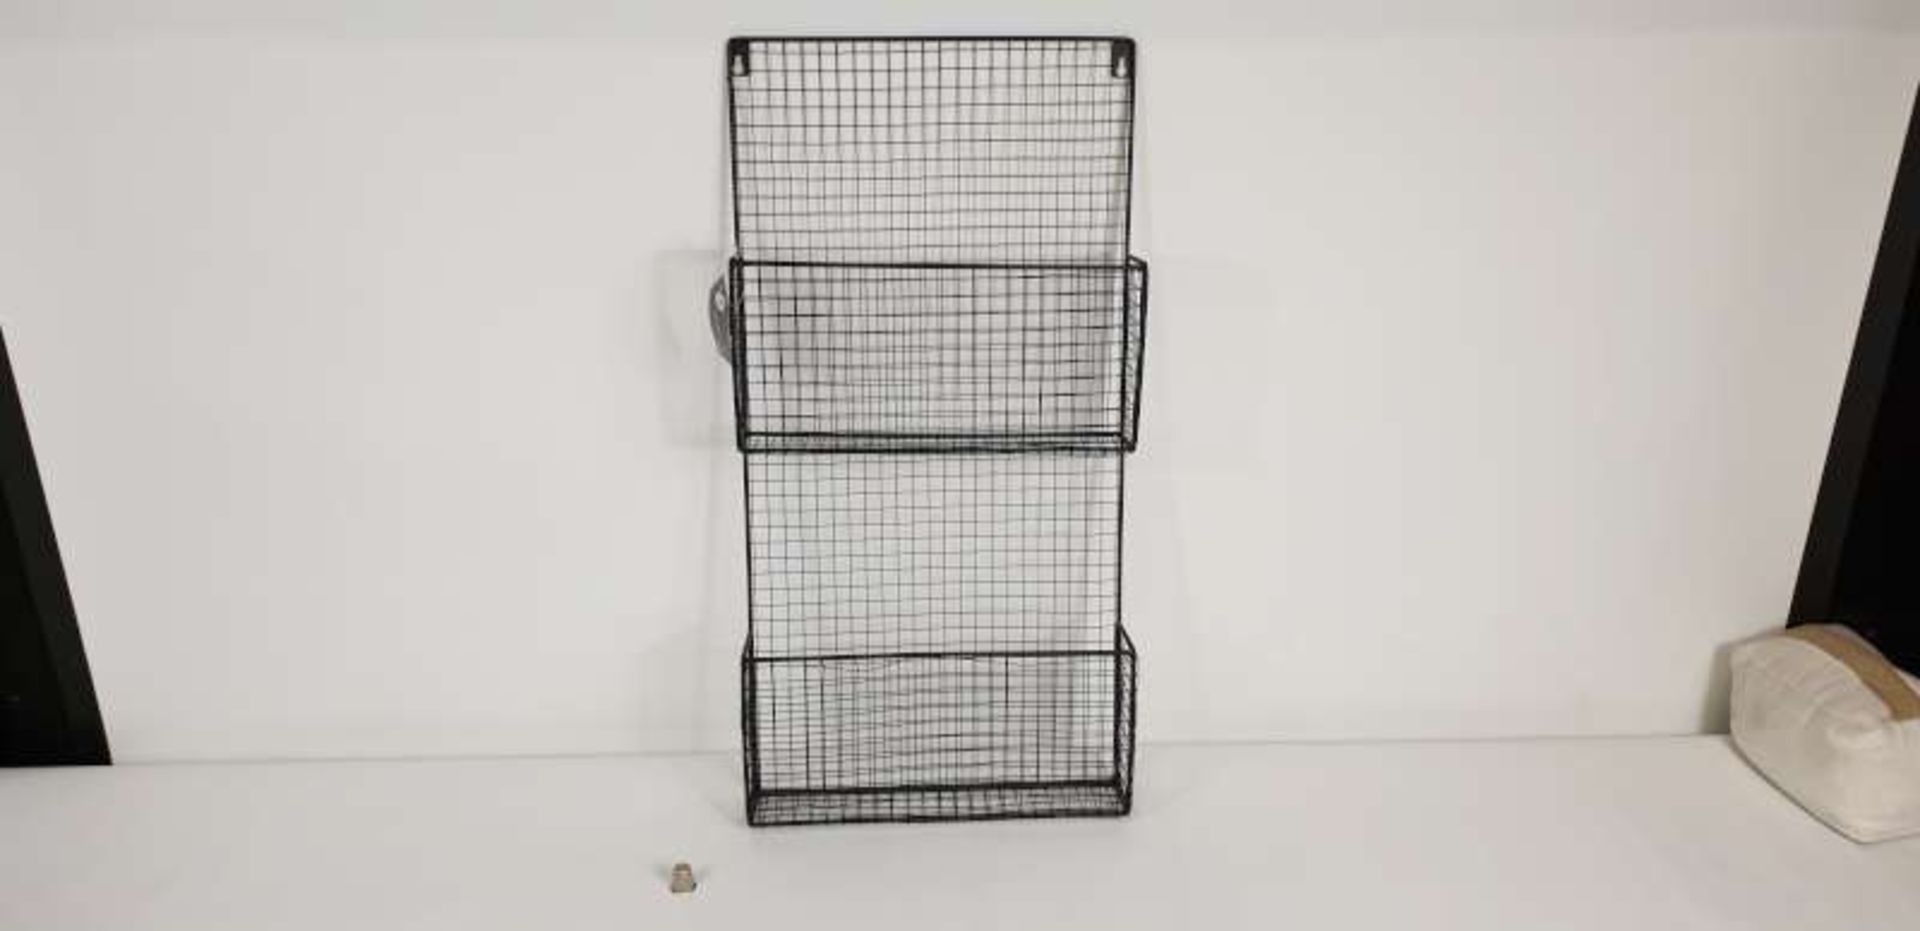 40 X BRAND NEW 2 RACK WIRE SHELF IN 10 BOXES